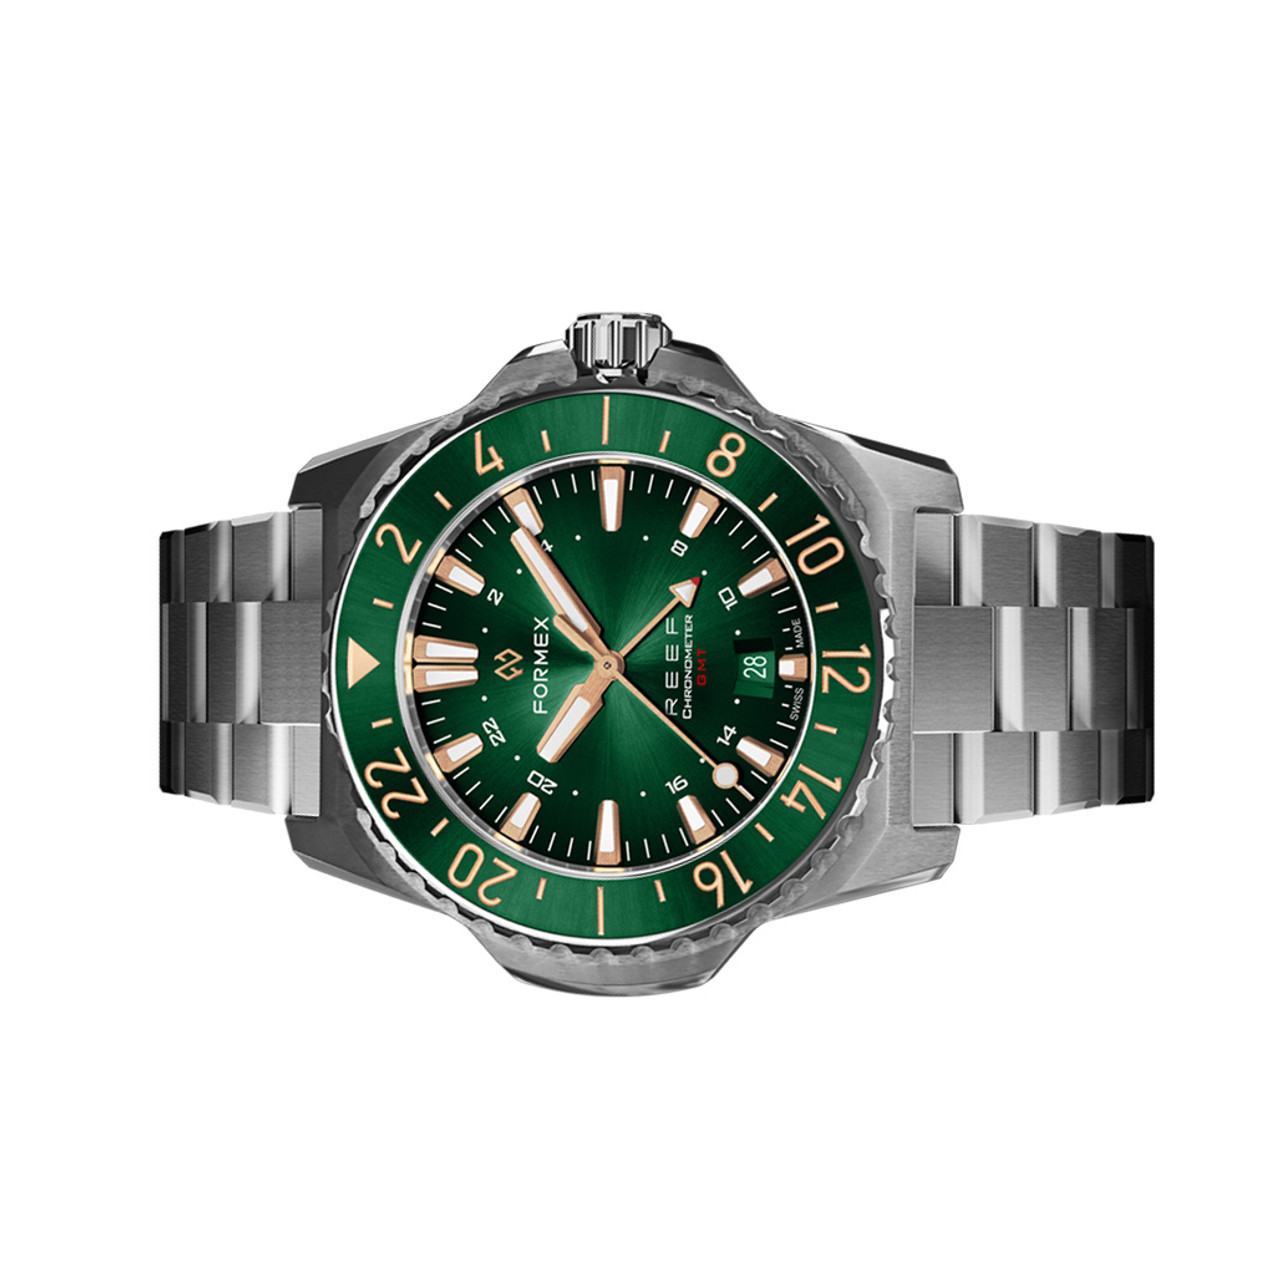 Formex REEF GMT Chronometer Dive Watch with Gilt Green Dial and Bezel  #2202.1.5388.100